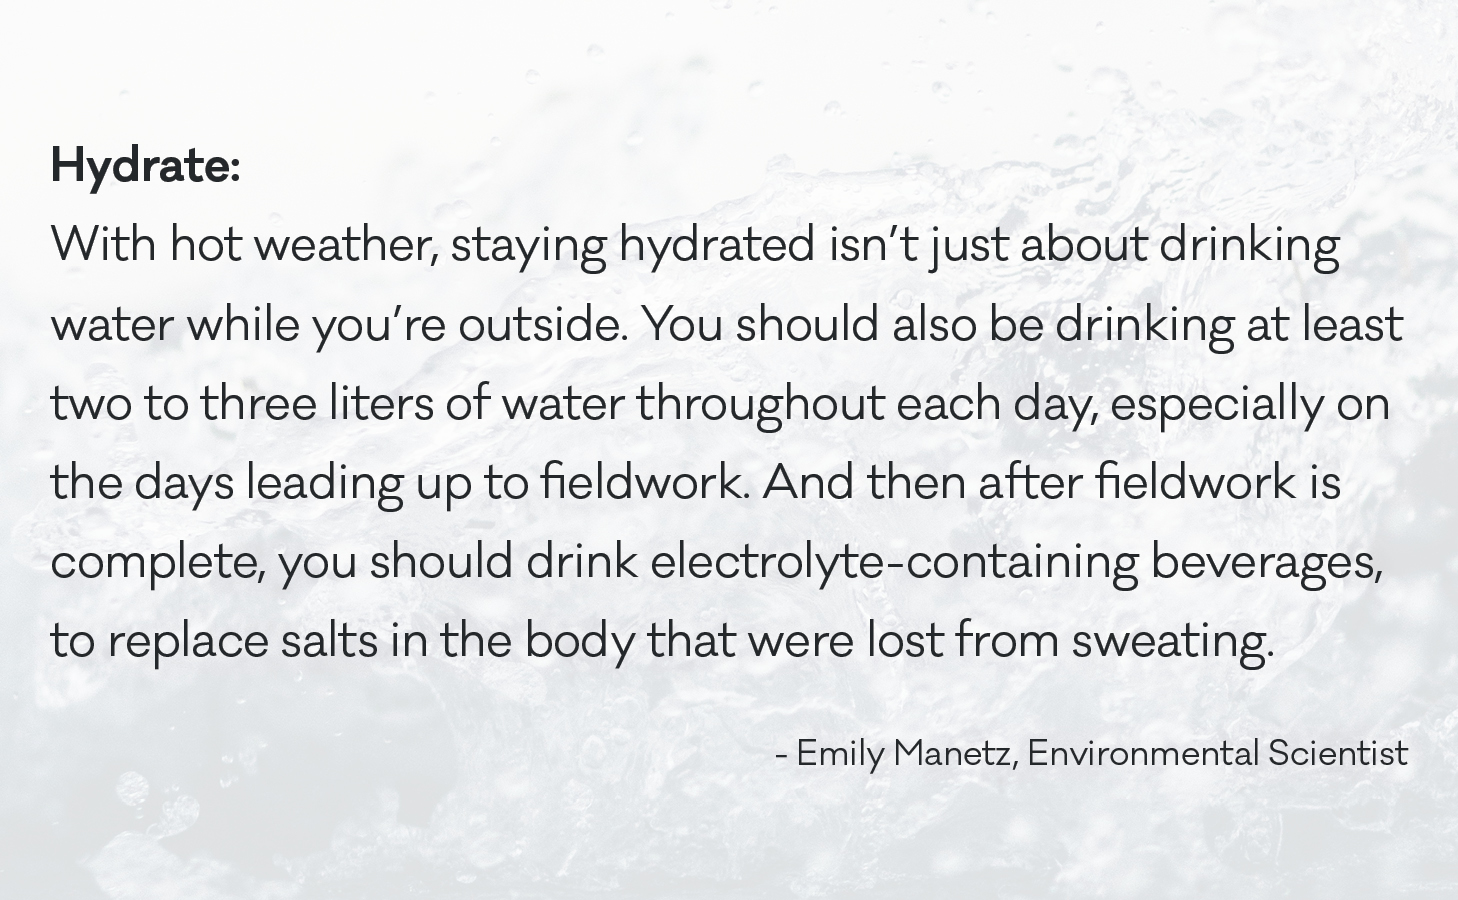 With hot weather, staying hydrated isn’t just about drinking water while you’re outside. You should also be drinking at least two to three liters of water throughout each day, especially on the days leading up to fieldwork. And then after fieldwork is complete, you should drink electrolyte-containing beverages, to replace salts in the body that were lost from sweating.